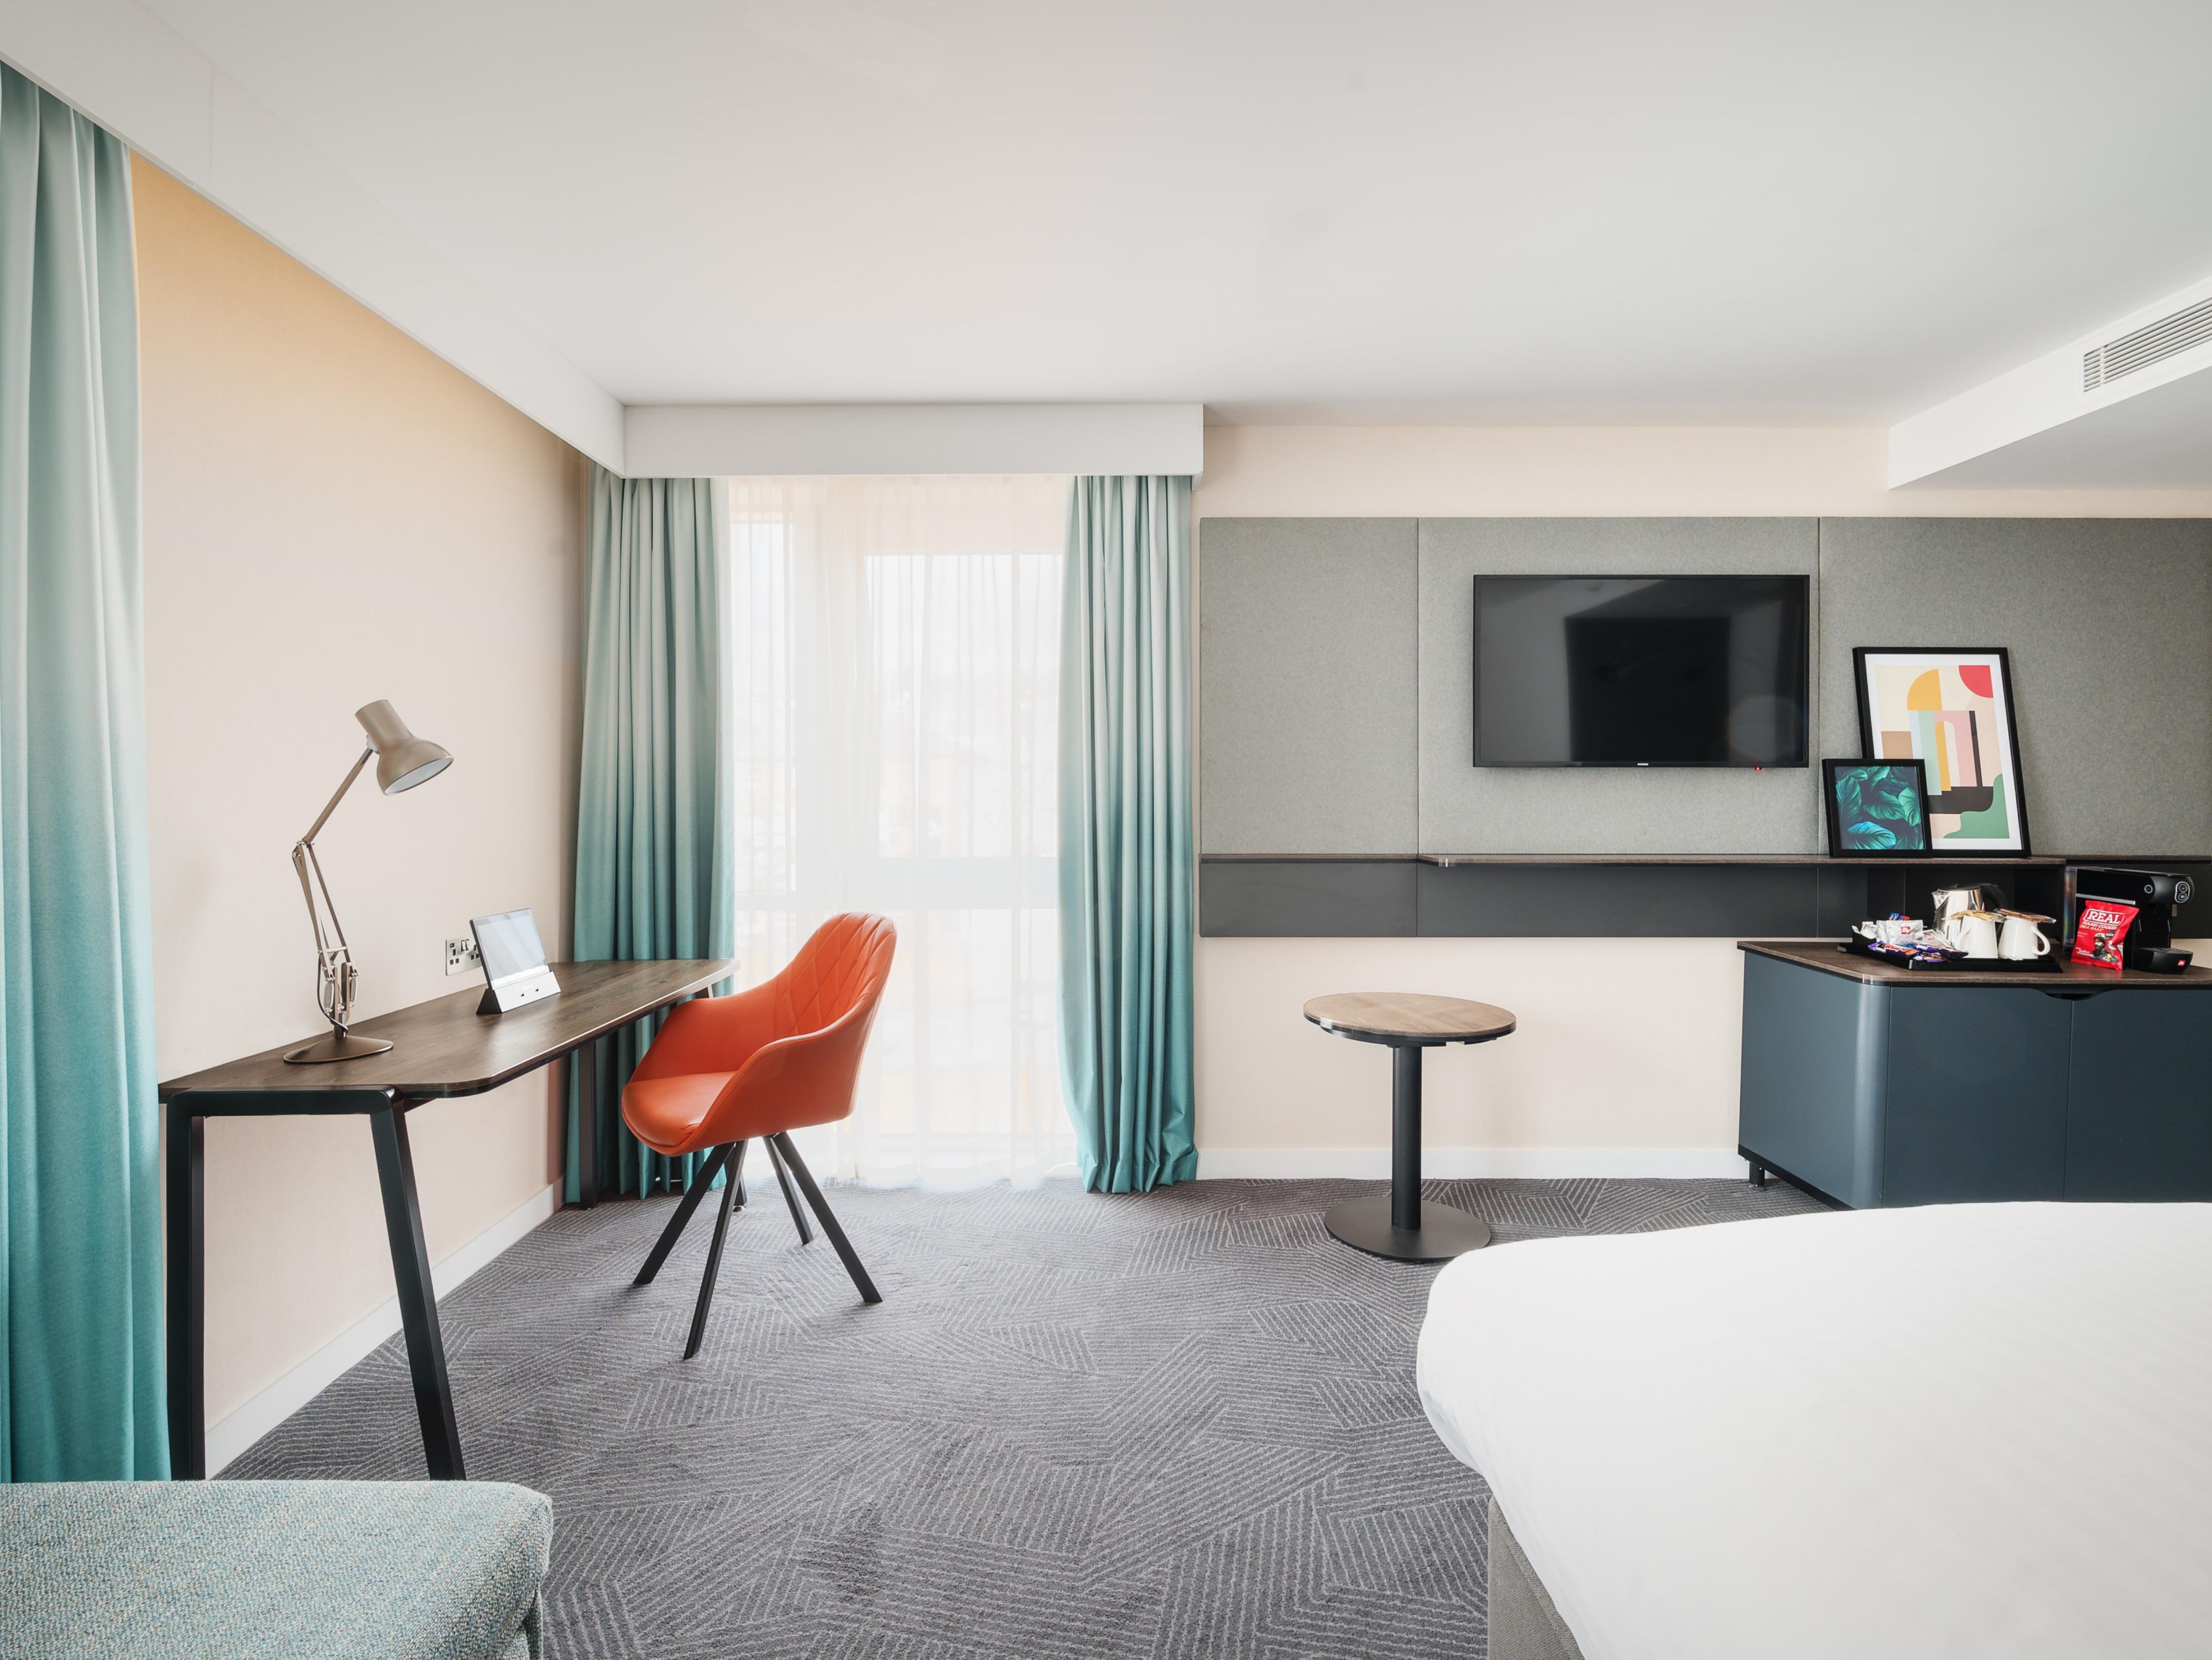 The safety of our guests and employees is our number one priority and we would like to reassure you that measures are in place to provide a clean, safe and welcoming environment in our hotel. Find out more by clicking 'Learn More' below.